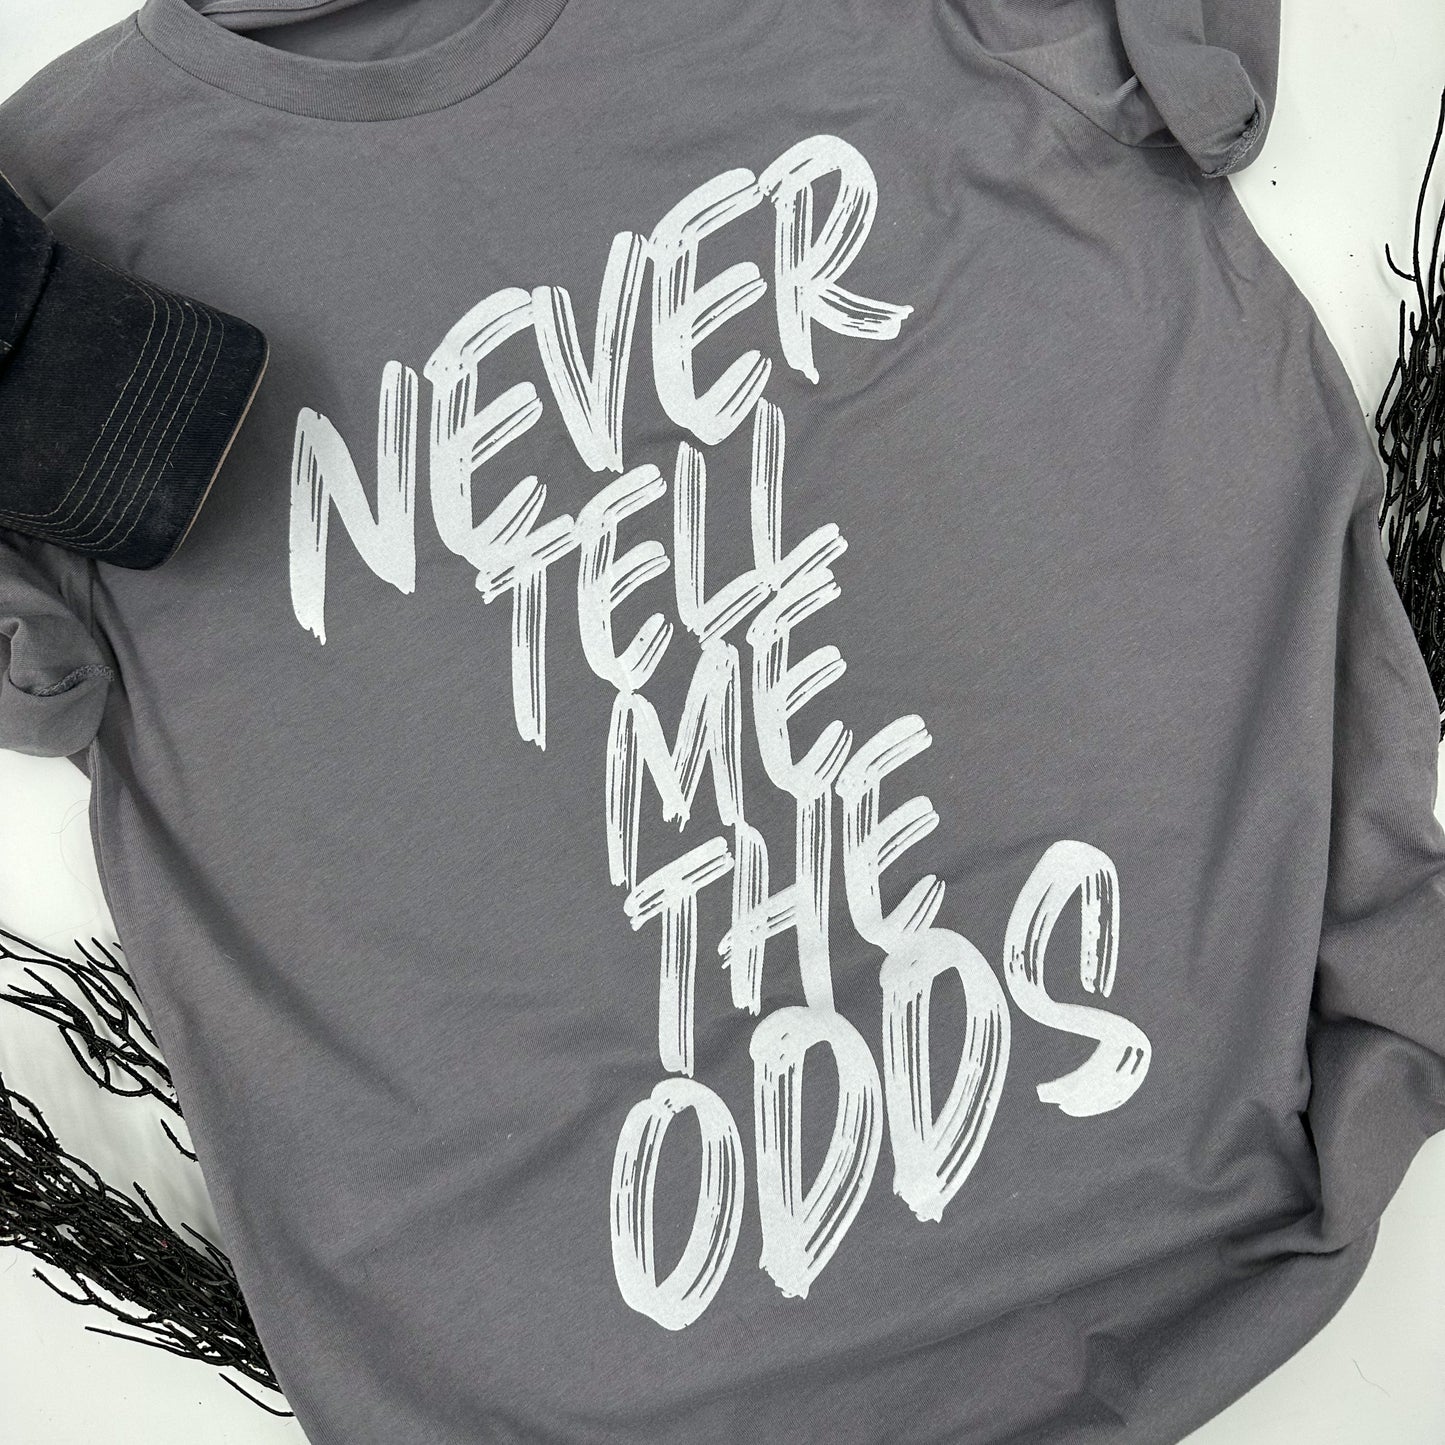 never tell me the odds | unisex tee